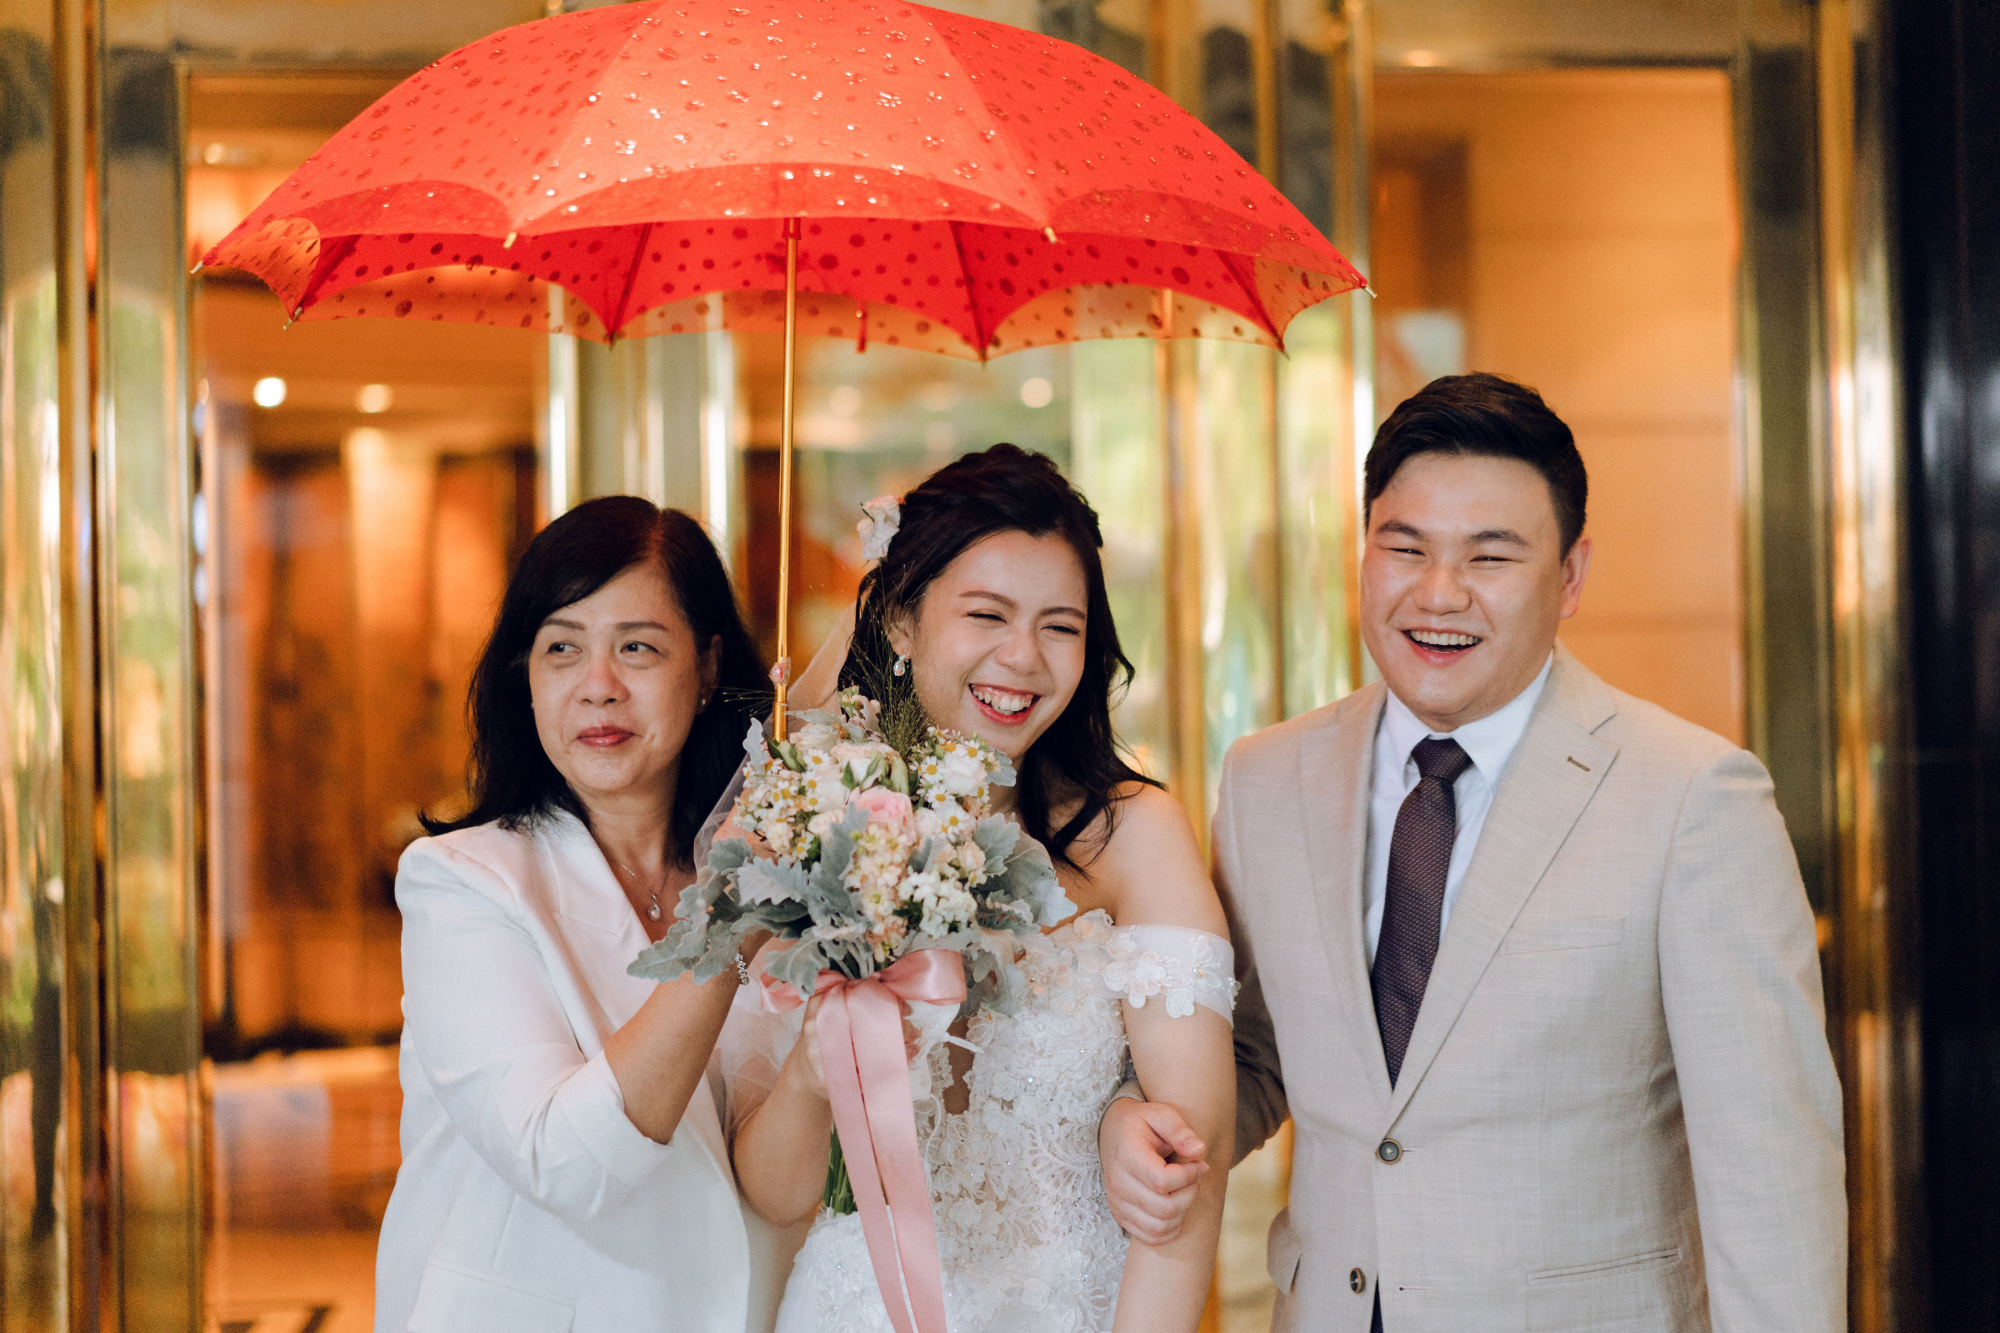 B & J Wedding Day Lunch Photography Coverage At St Regis Hotel by Sam on OneThreeOneFour 18